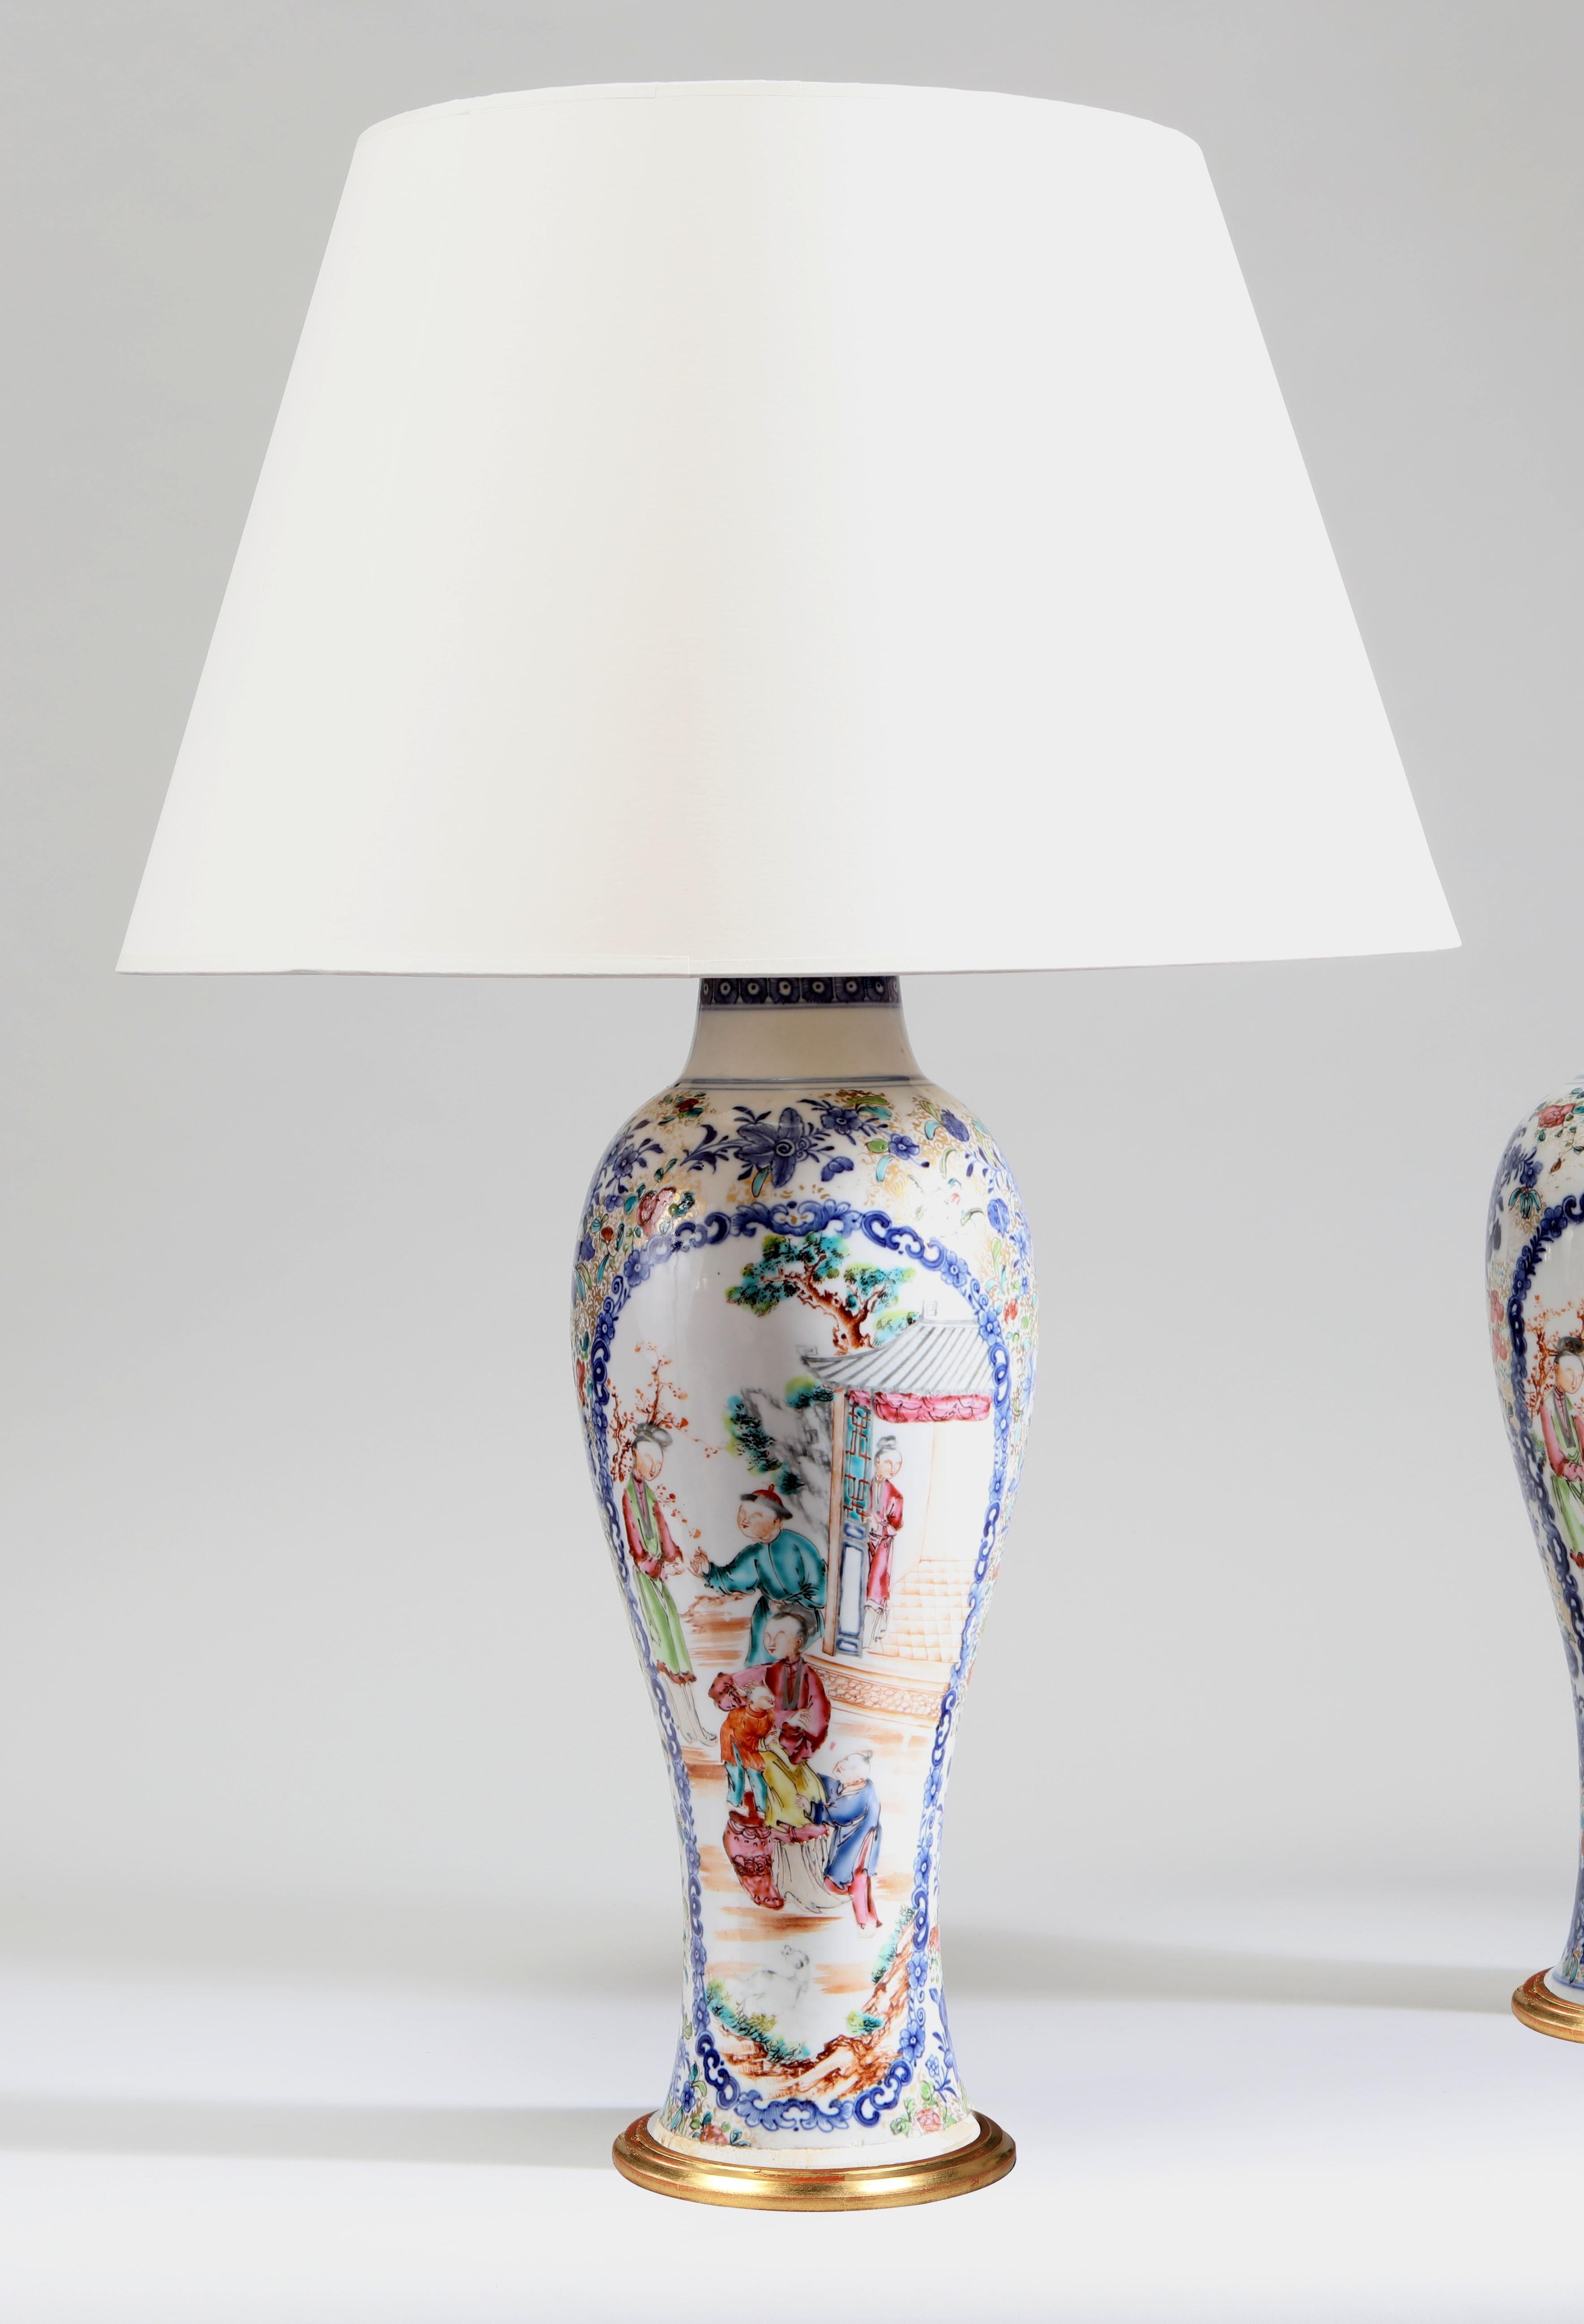 A Pair of 18th Century Chinese Porcelain Vases as Table Lamps with Gilt Bases For Sale 1